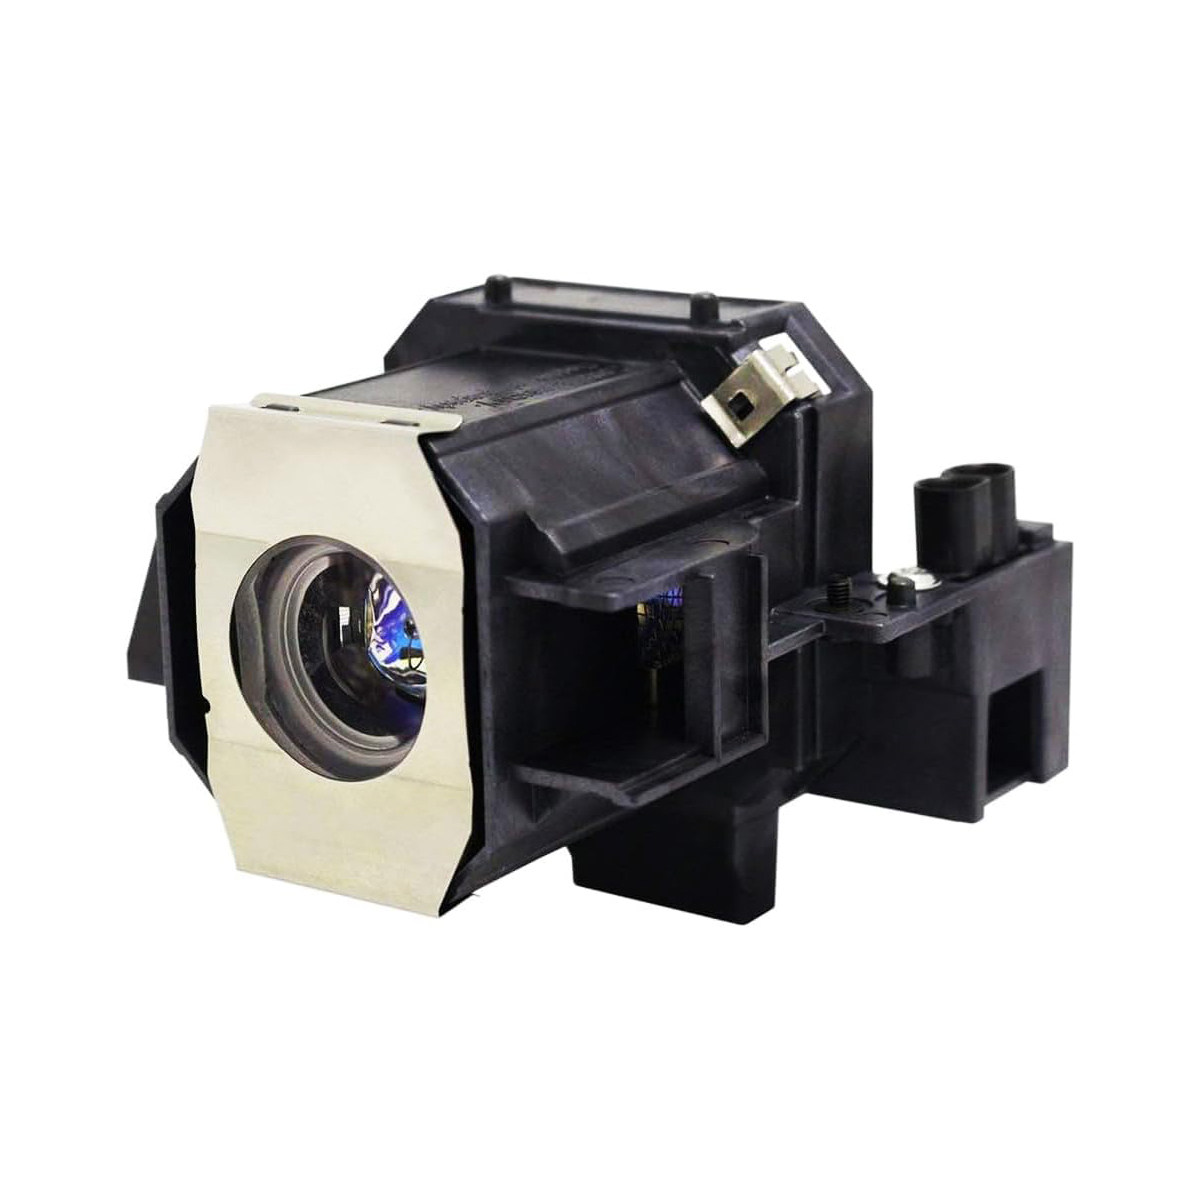 Replacement Projector lamp ELPLP35 For Epson EMP-TW520 EMP-TW600 EMP-TW620  EMP-TW680